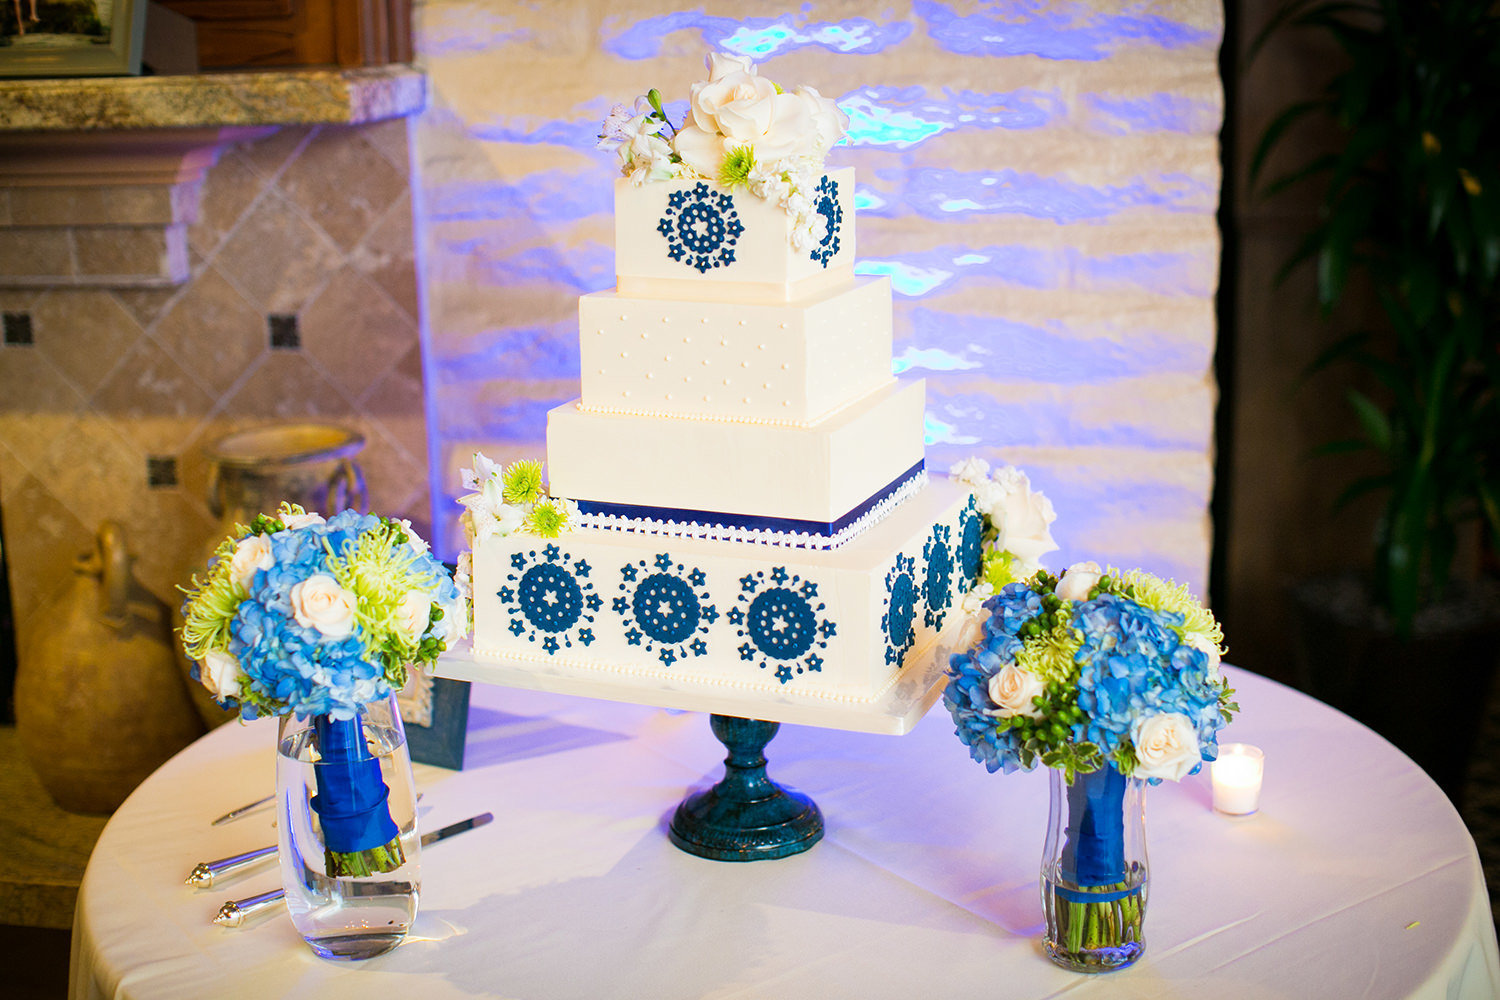 cake table at reception